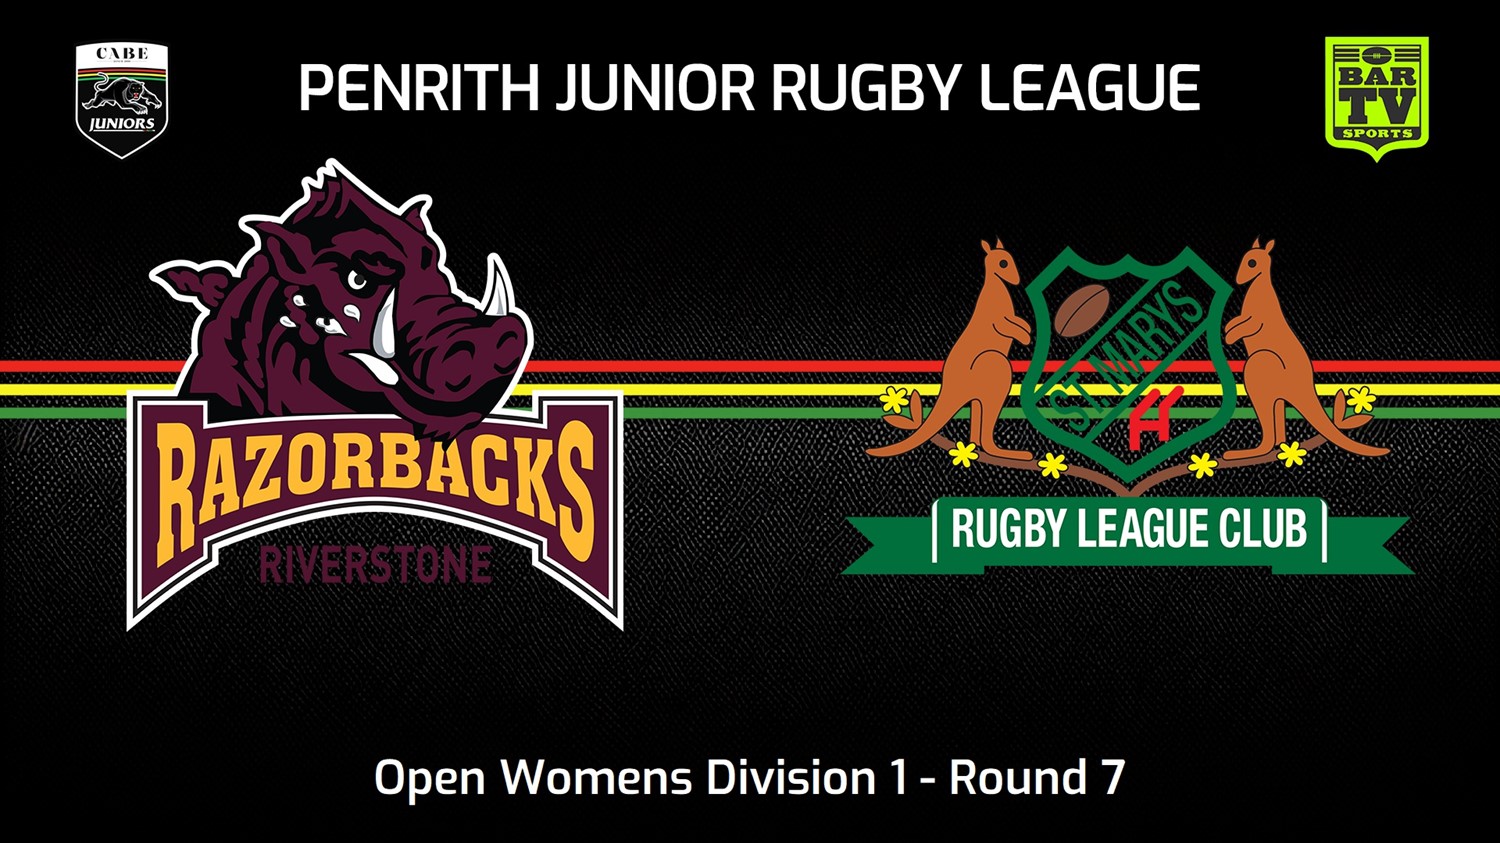 240526-video-Penrith & District Junior Rugby League Round 7 - Open Womens Division 1 - Riverstone Razorbacks v St Marys Slate Image